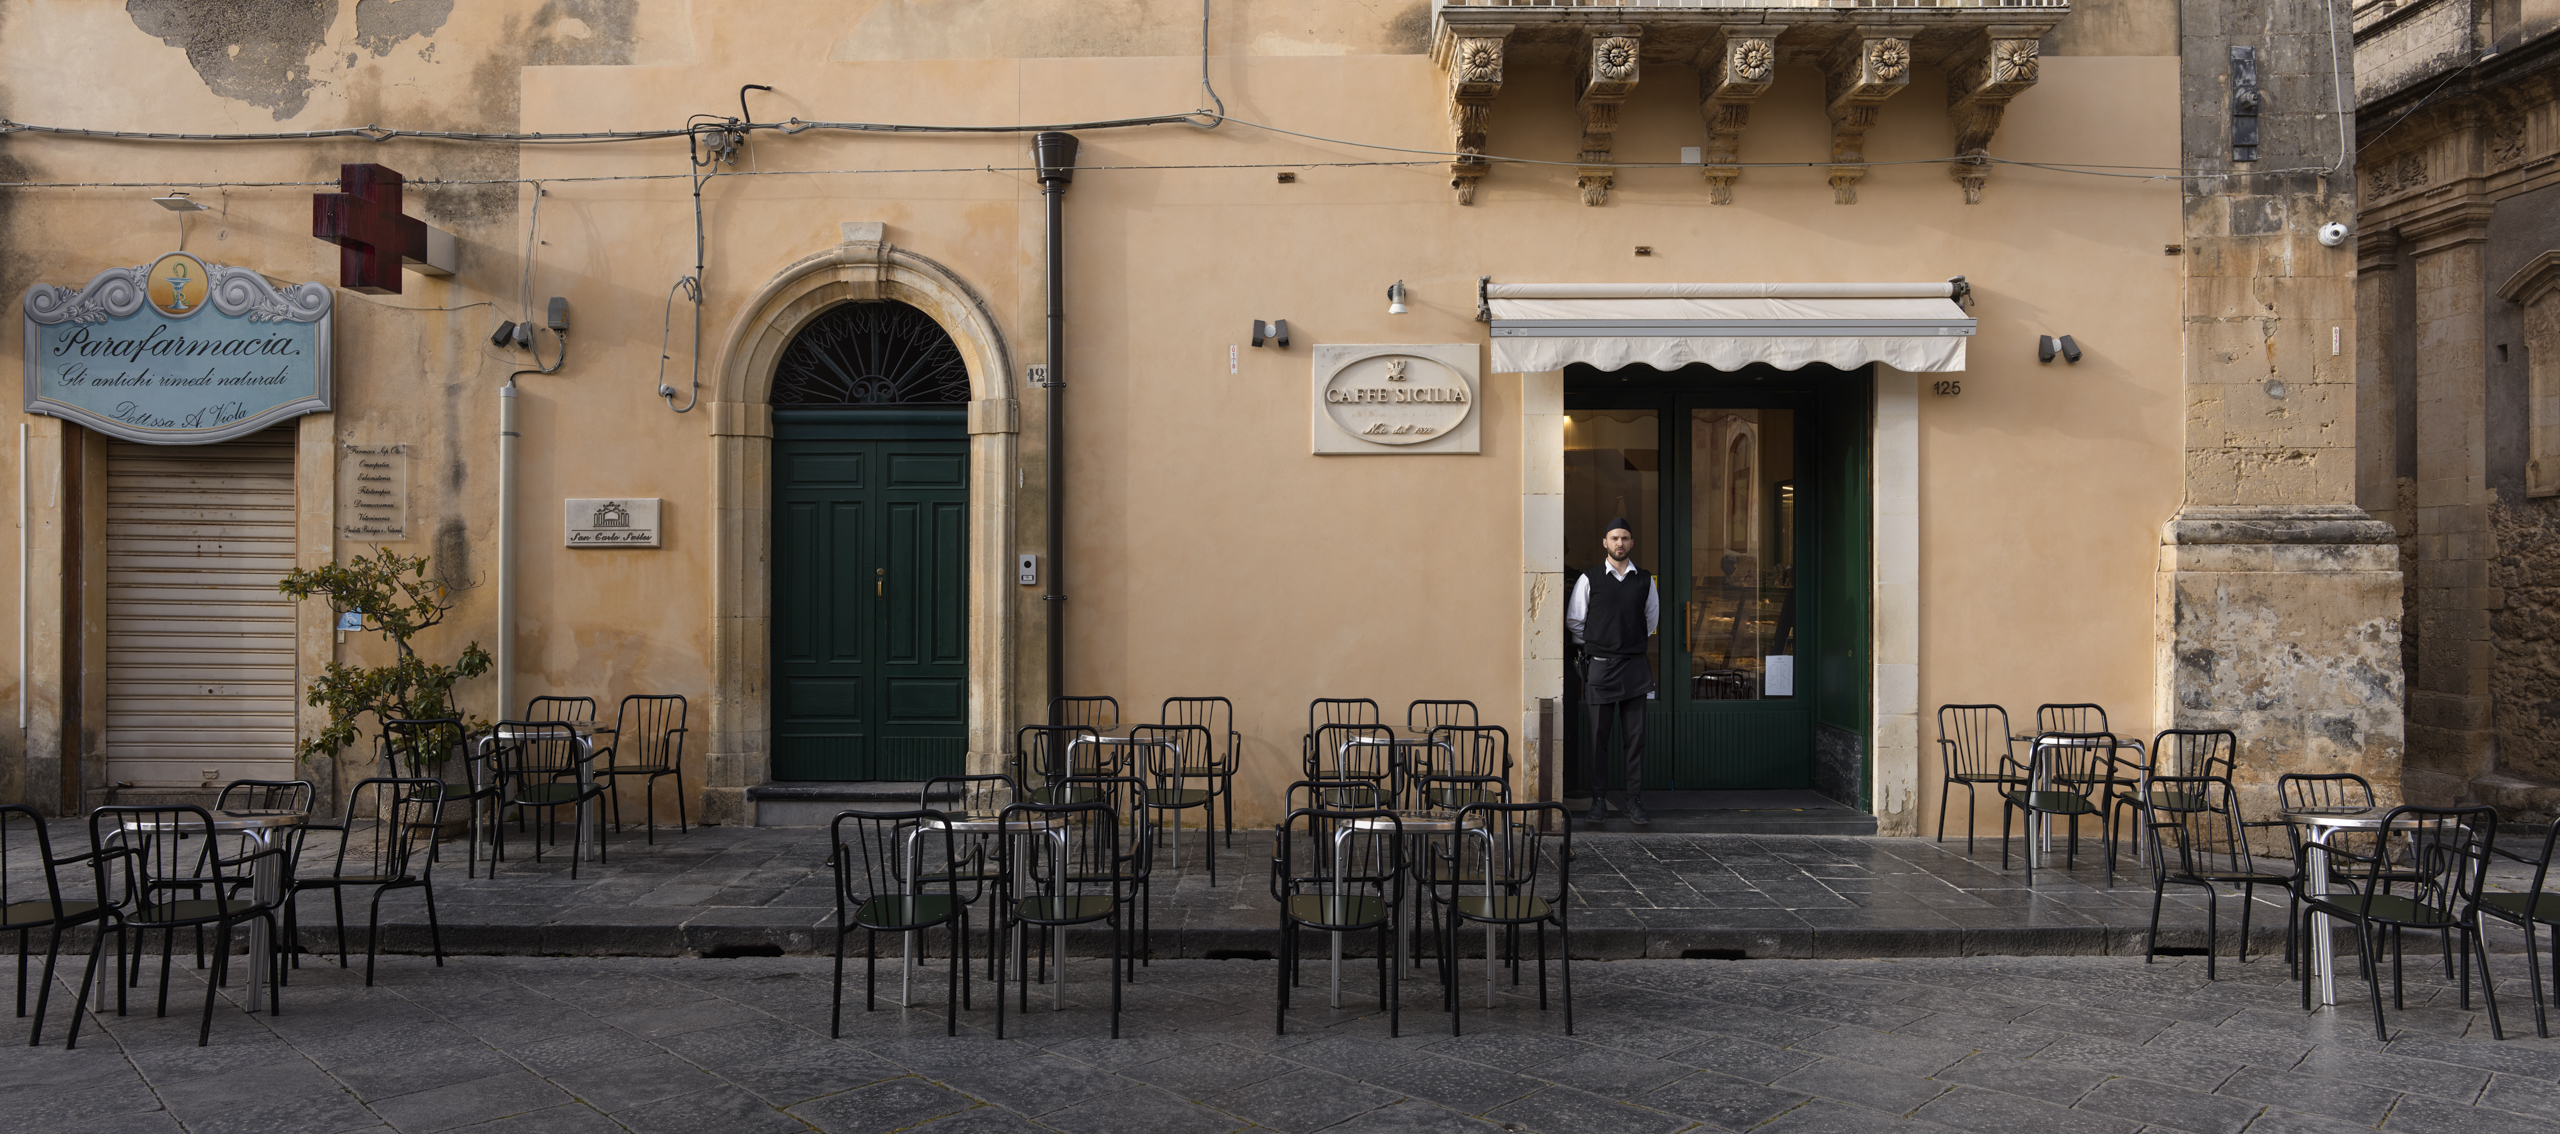 caffe Sicilia a story by corrado assenza for resilience food stories